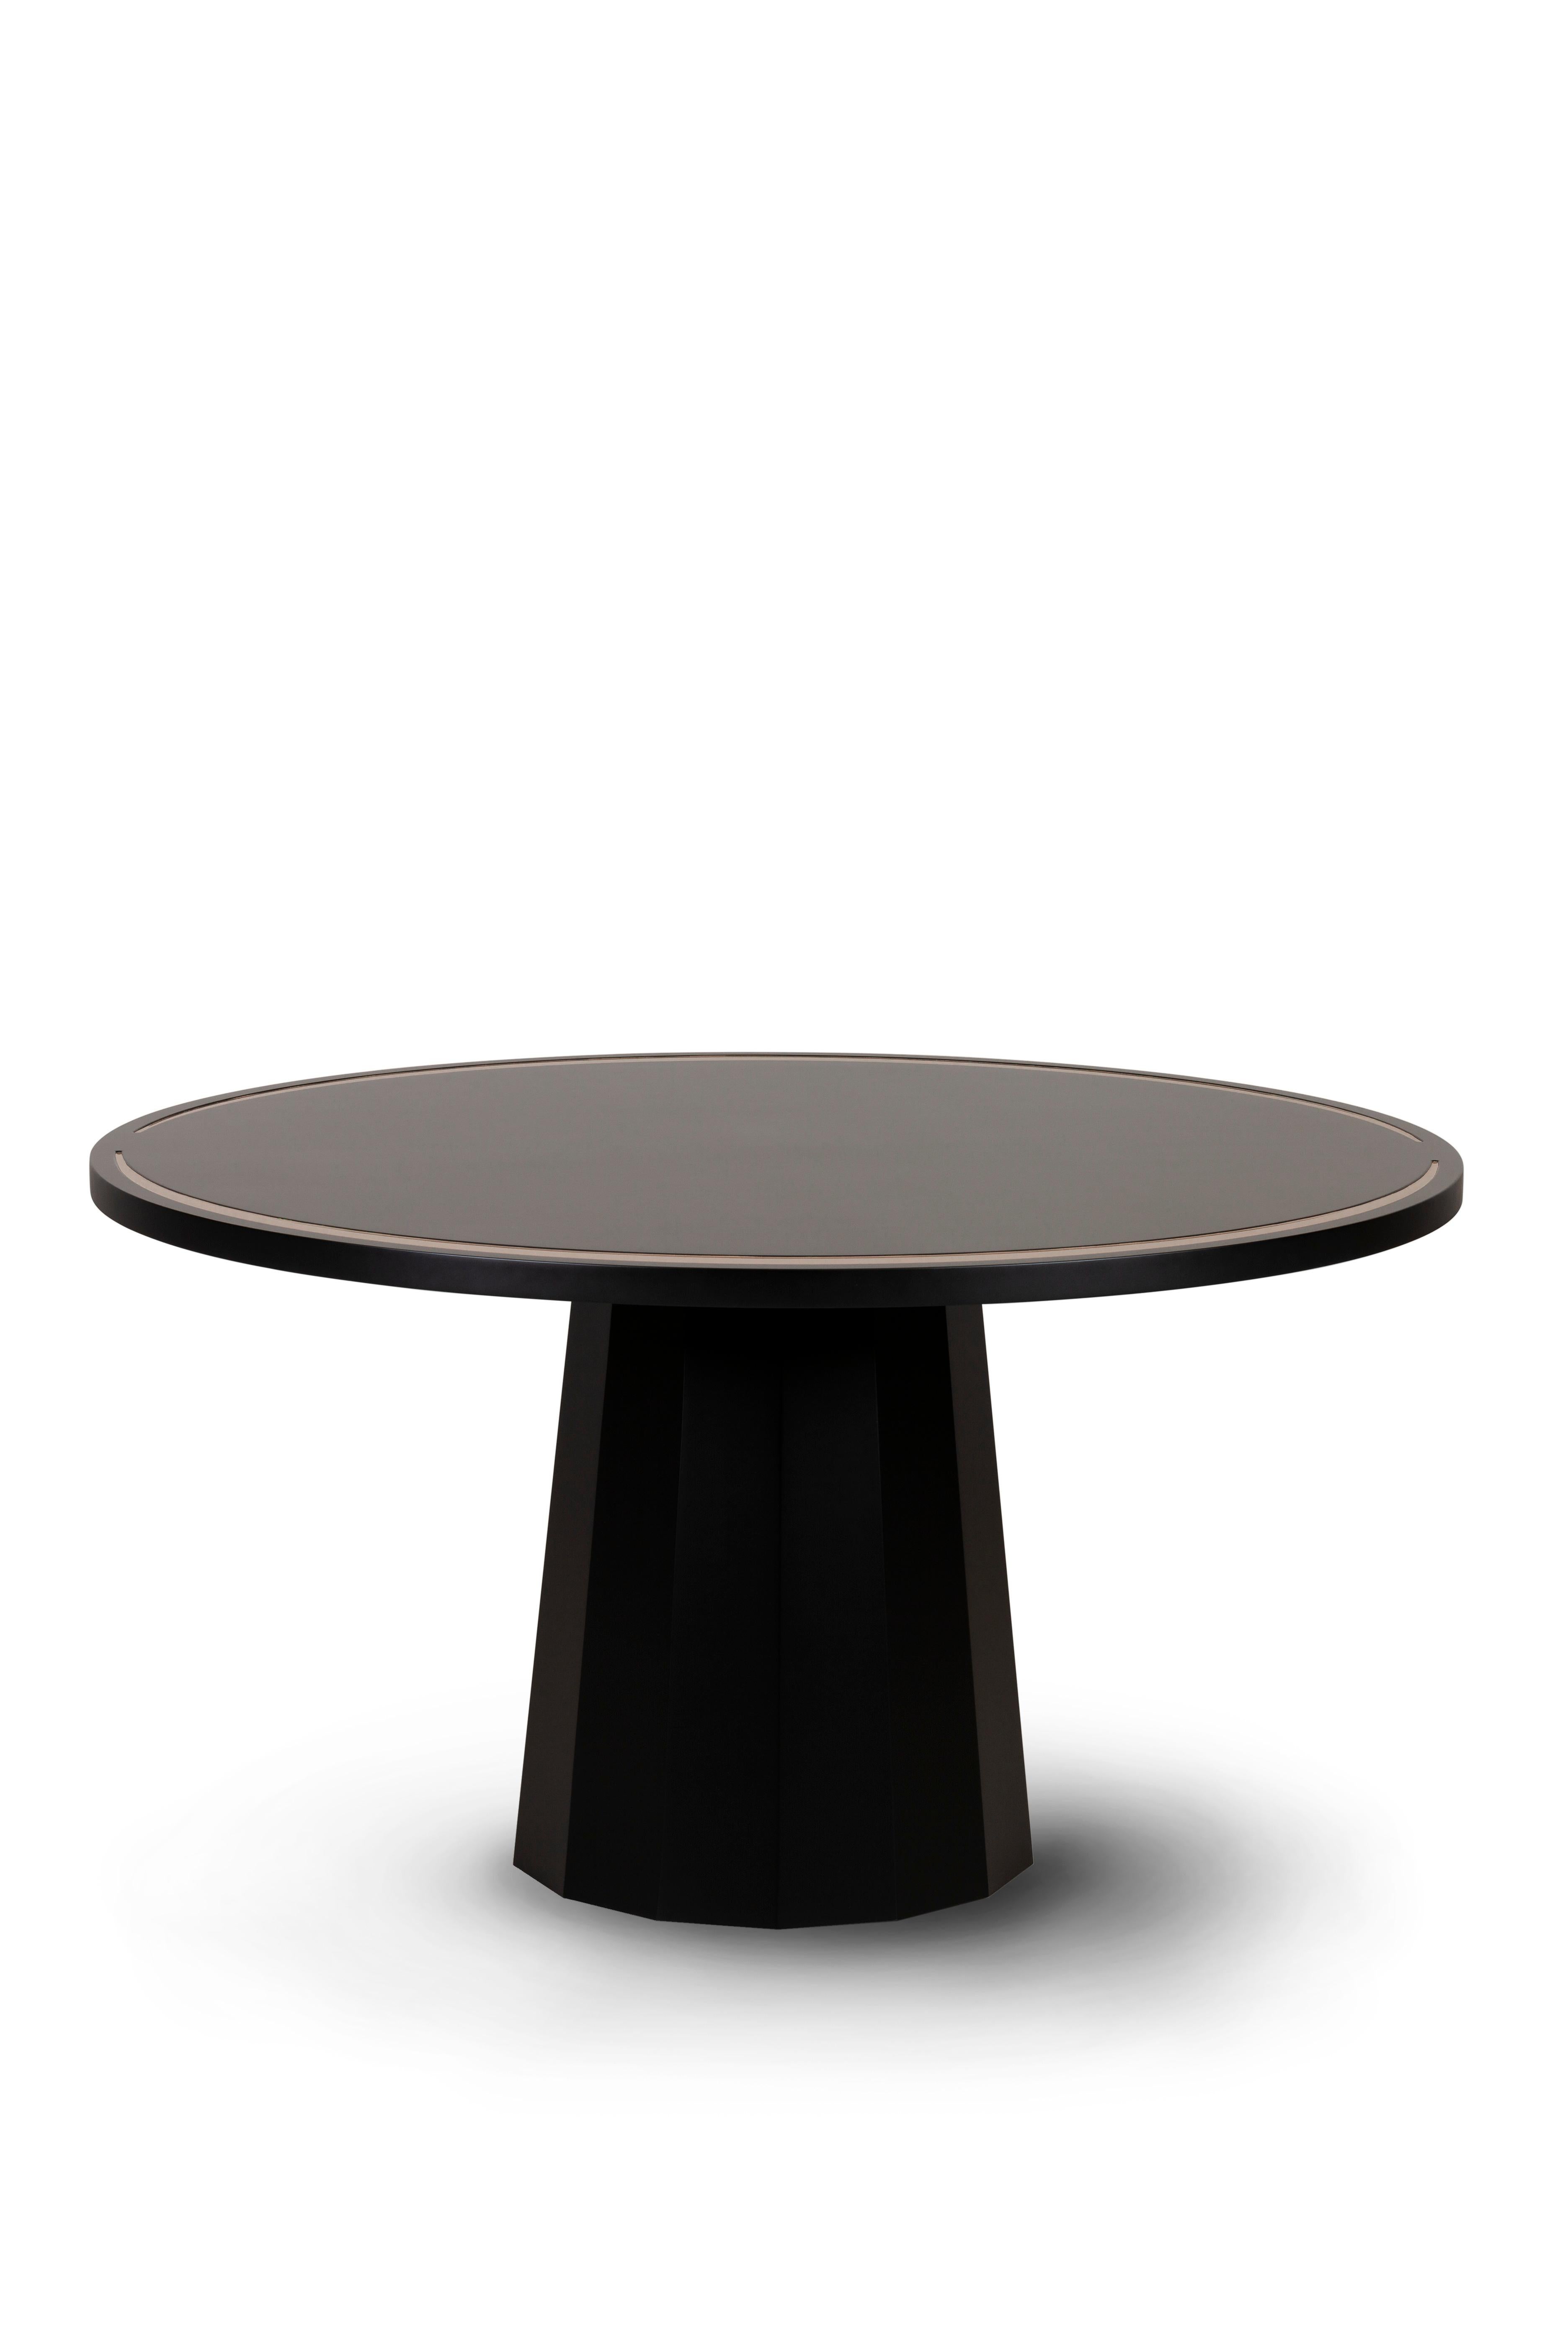 Portuguese Modern Howlite Round Dining Table Black Handmade in Portugal by Greenapple For Sale